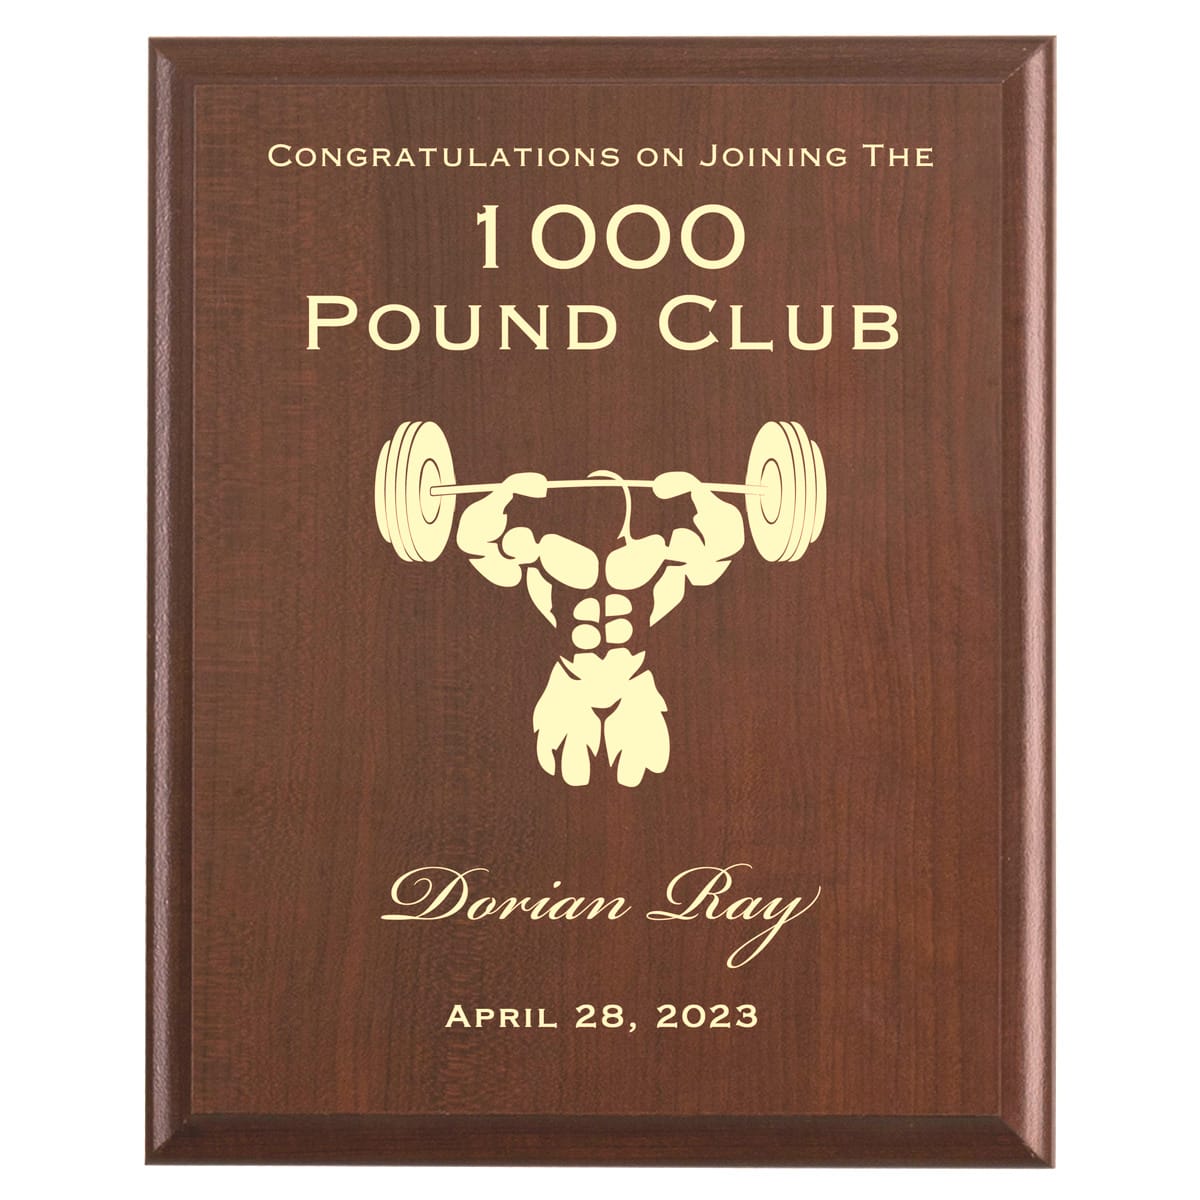 Plaque photo: 1000 Pound Club Award design with free personalization. Wood style finish with customized text.